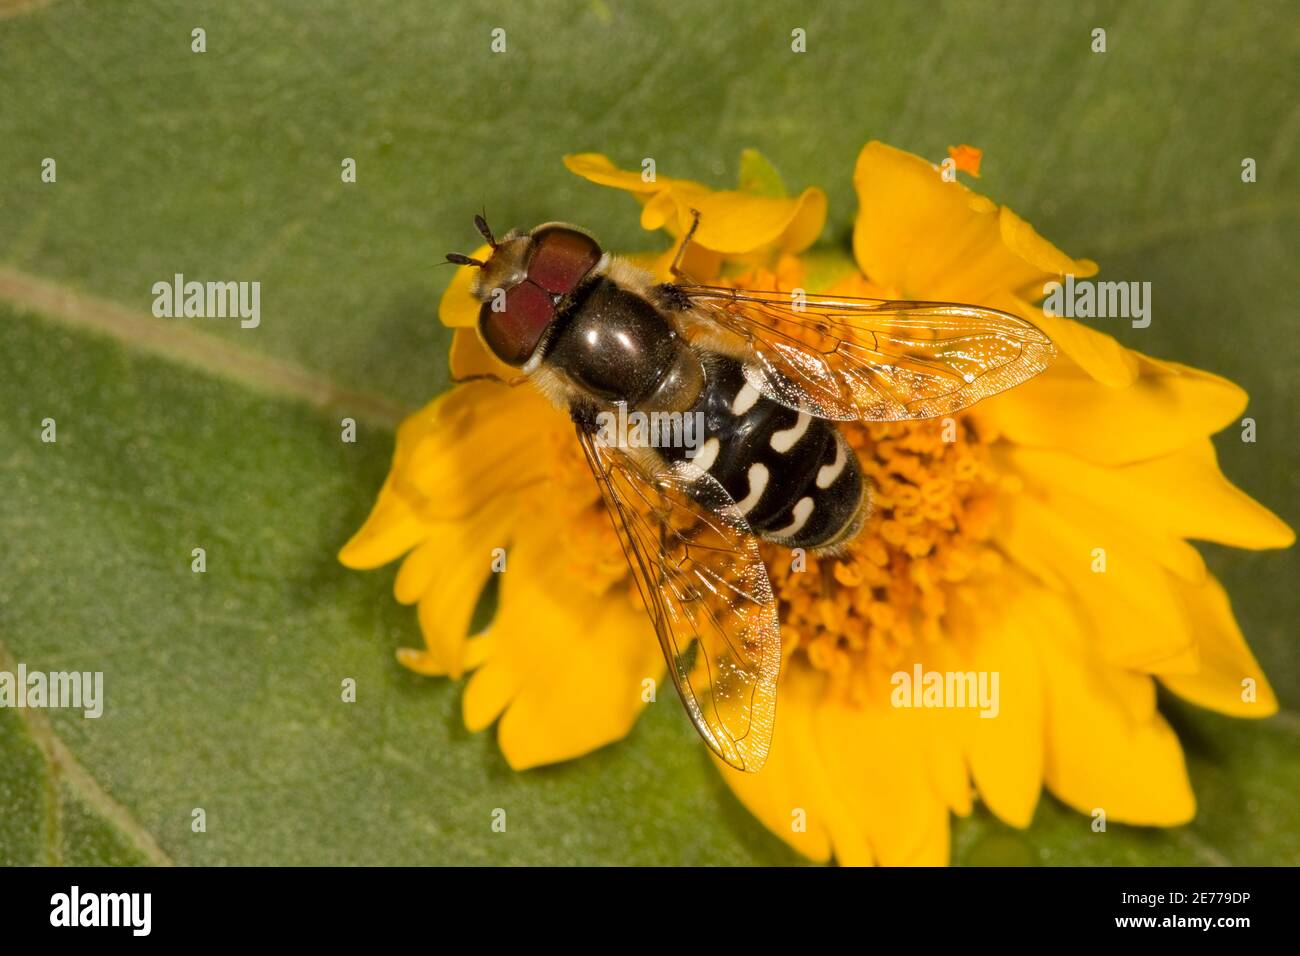 Syrphid Fly, Scaeva affinis, Syrphidae. Body Length 15 mm. Larva images 14100412-14100433 on 10-13-14. Stock Photo